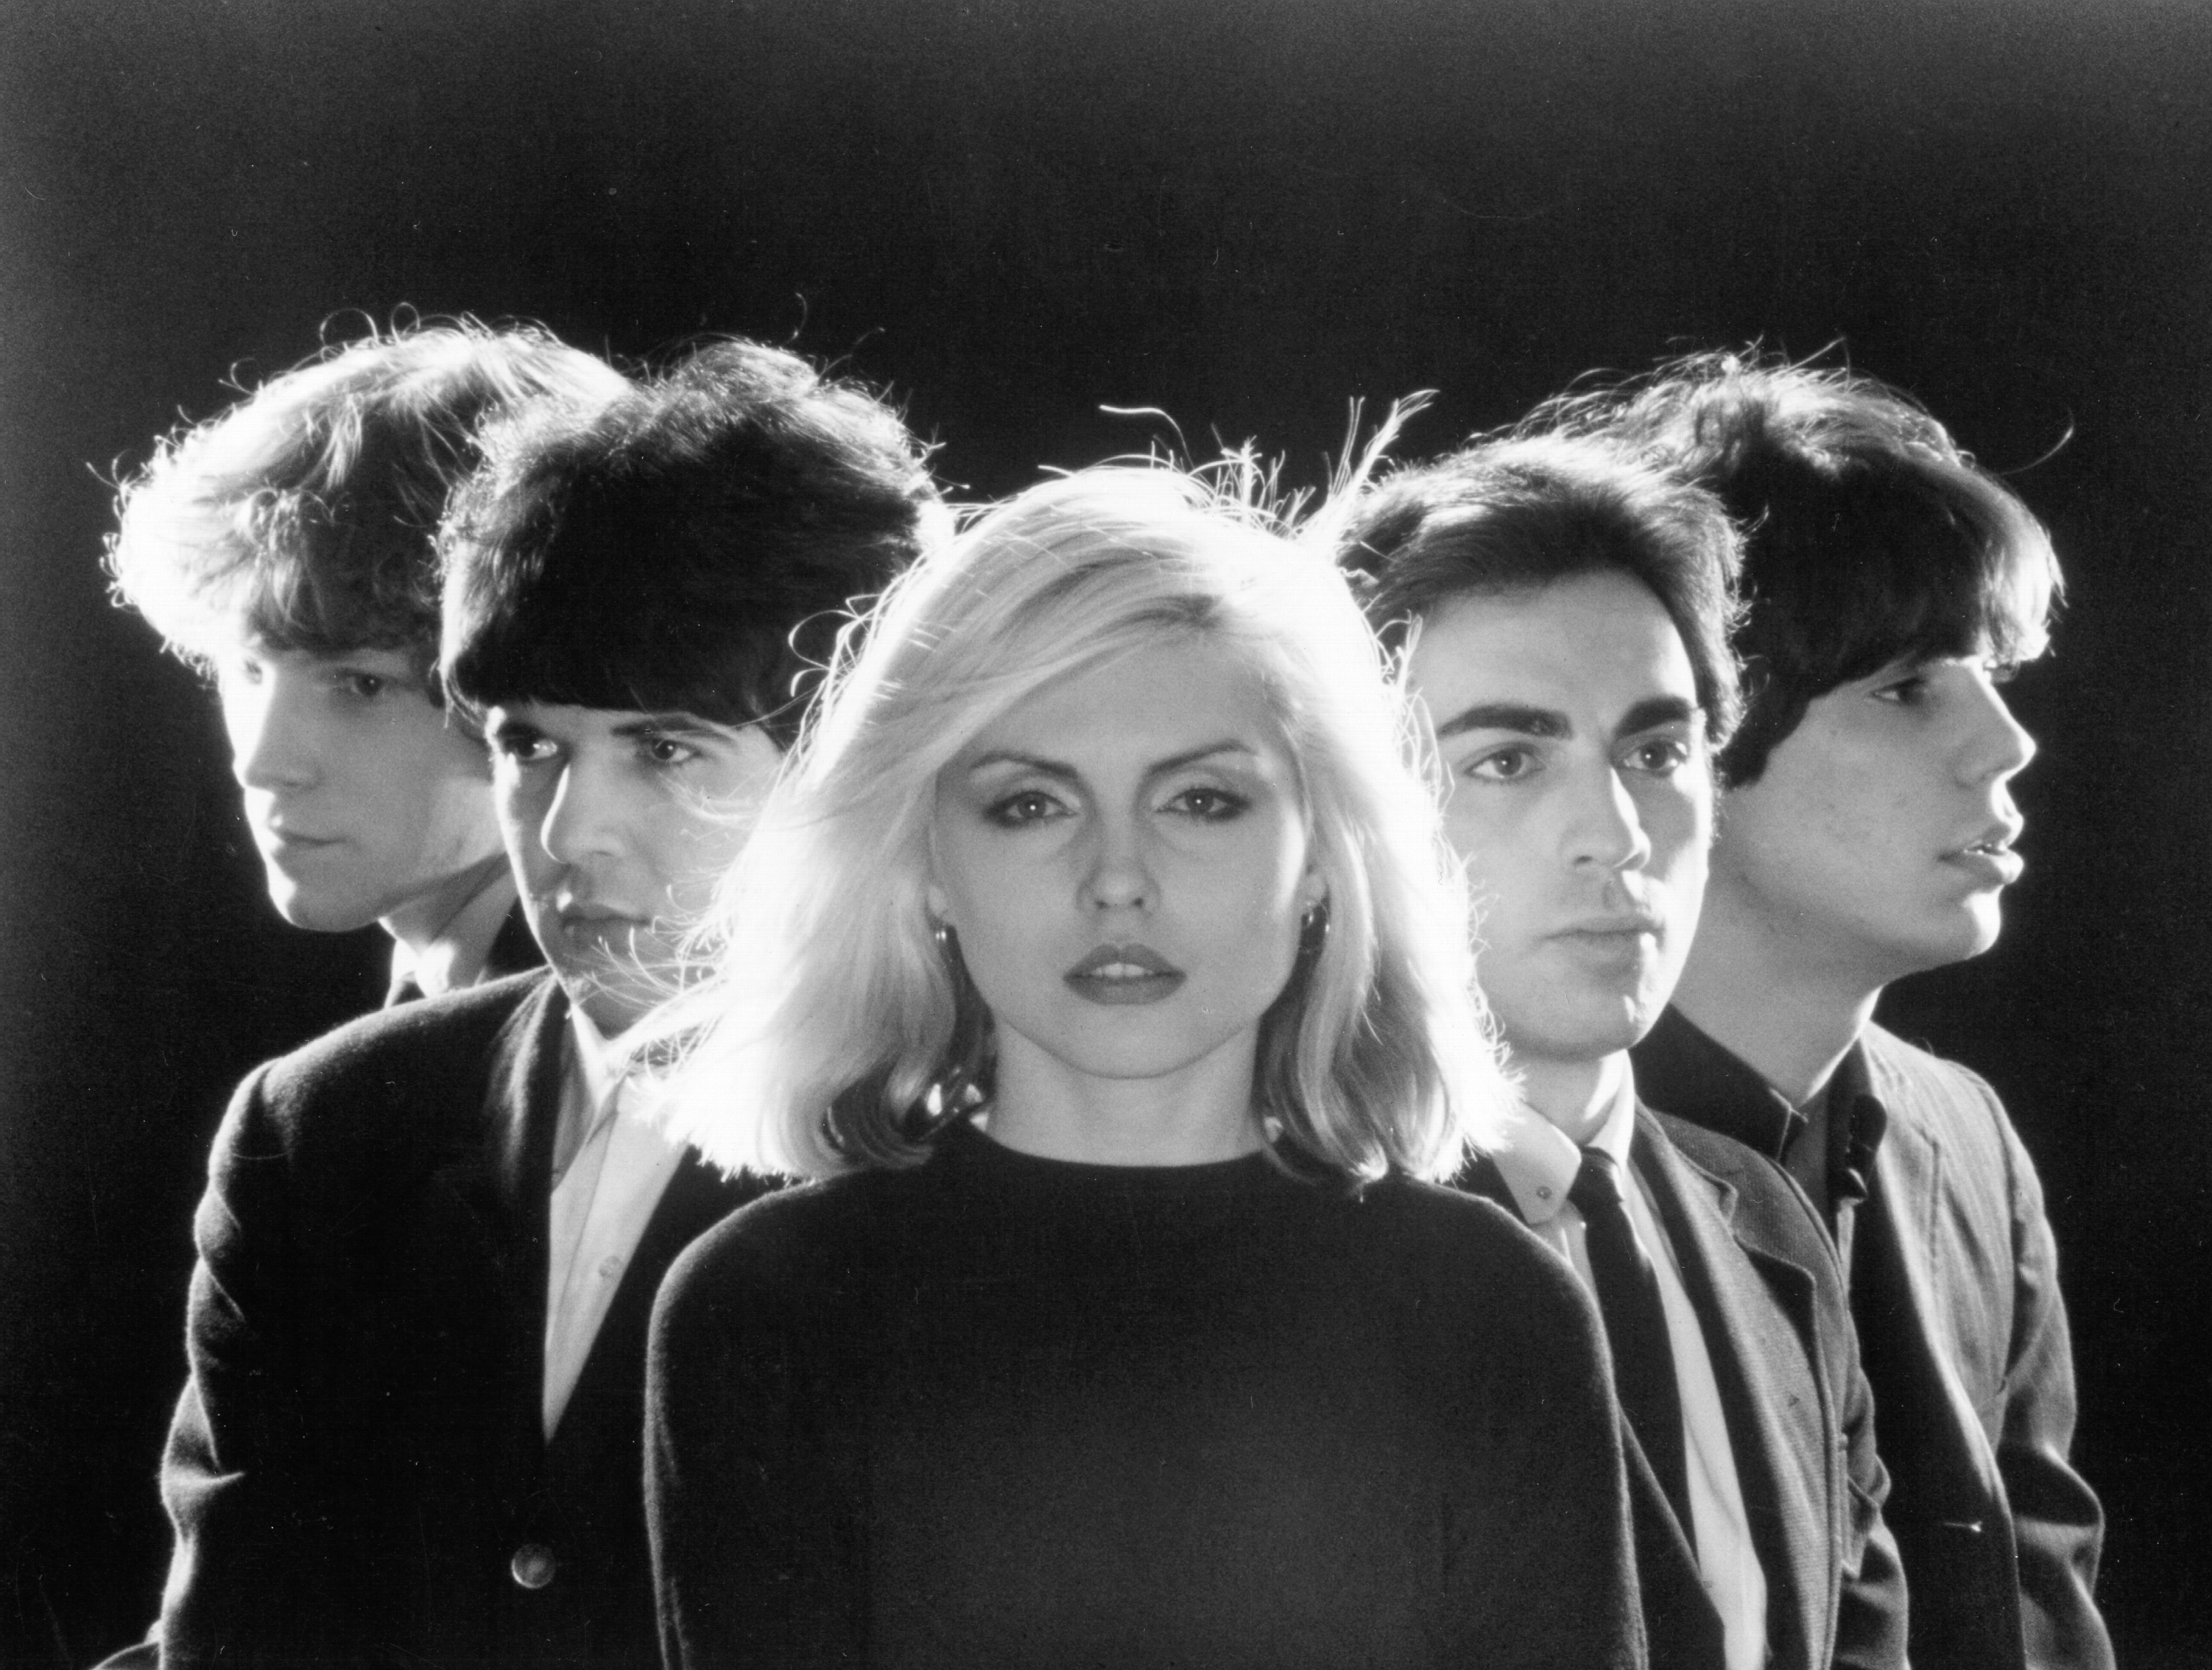 Blondie in 1976 (Photo by Michael Ochs Archives / Getty Images)